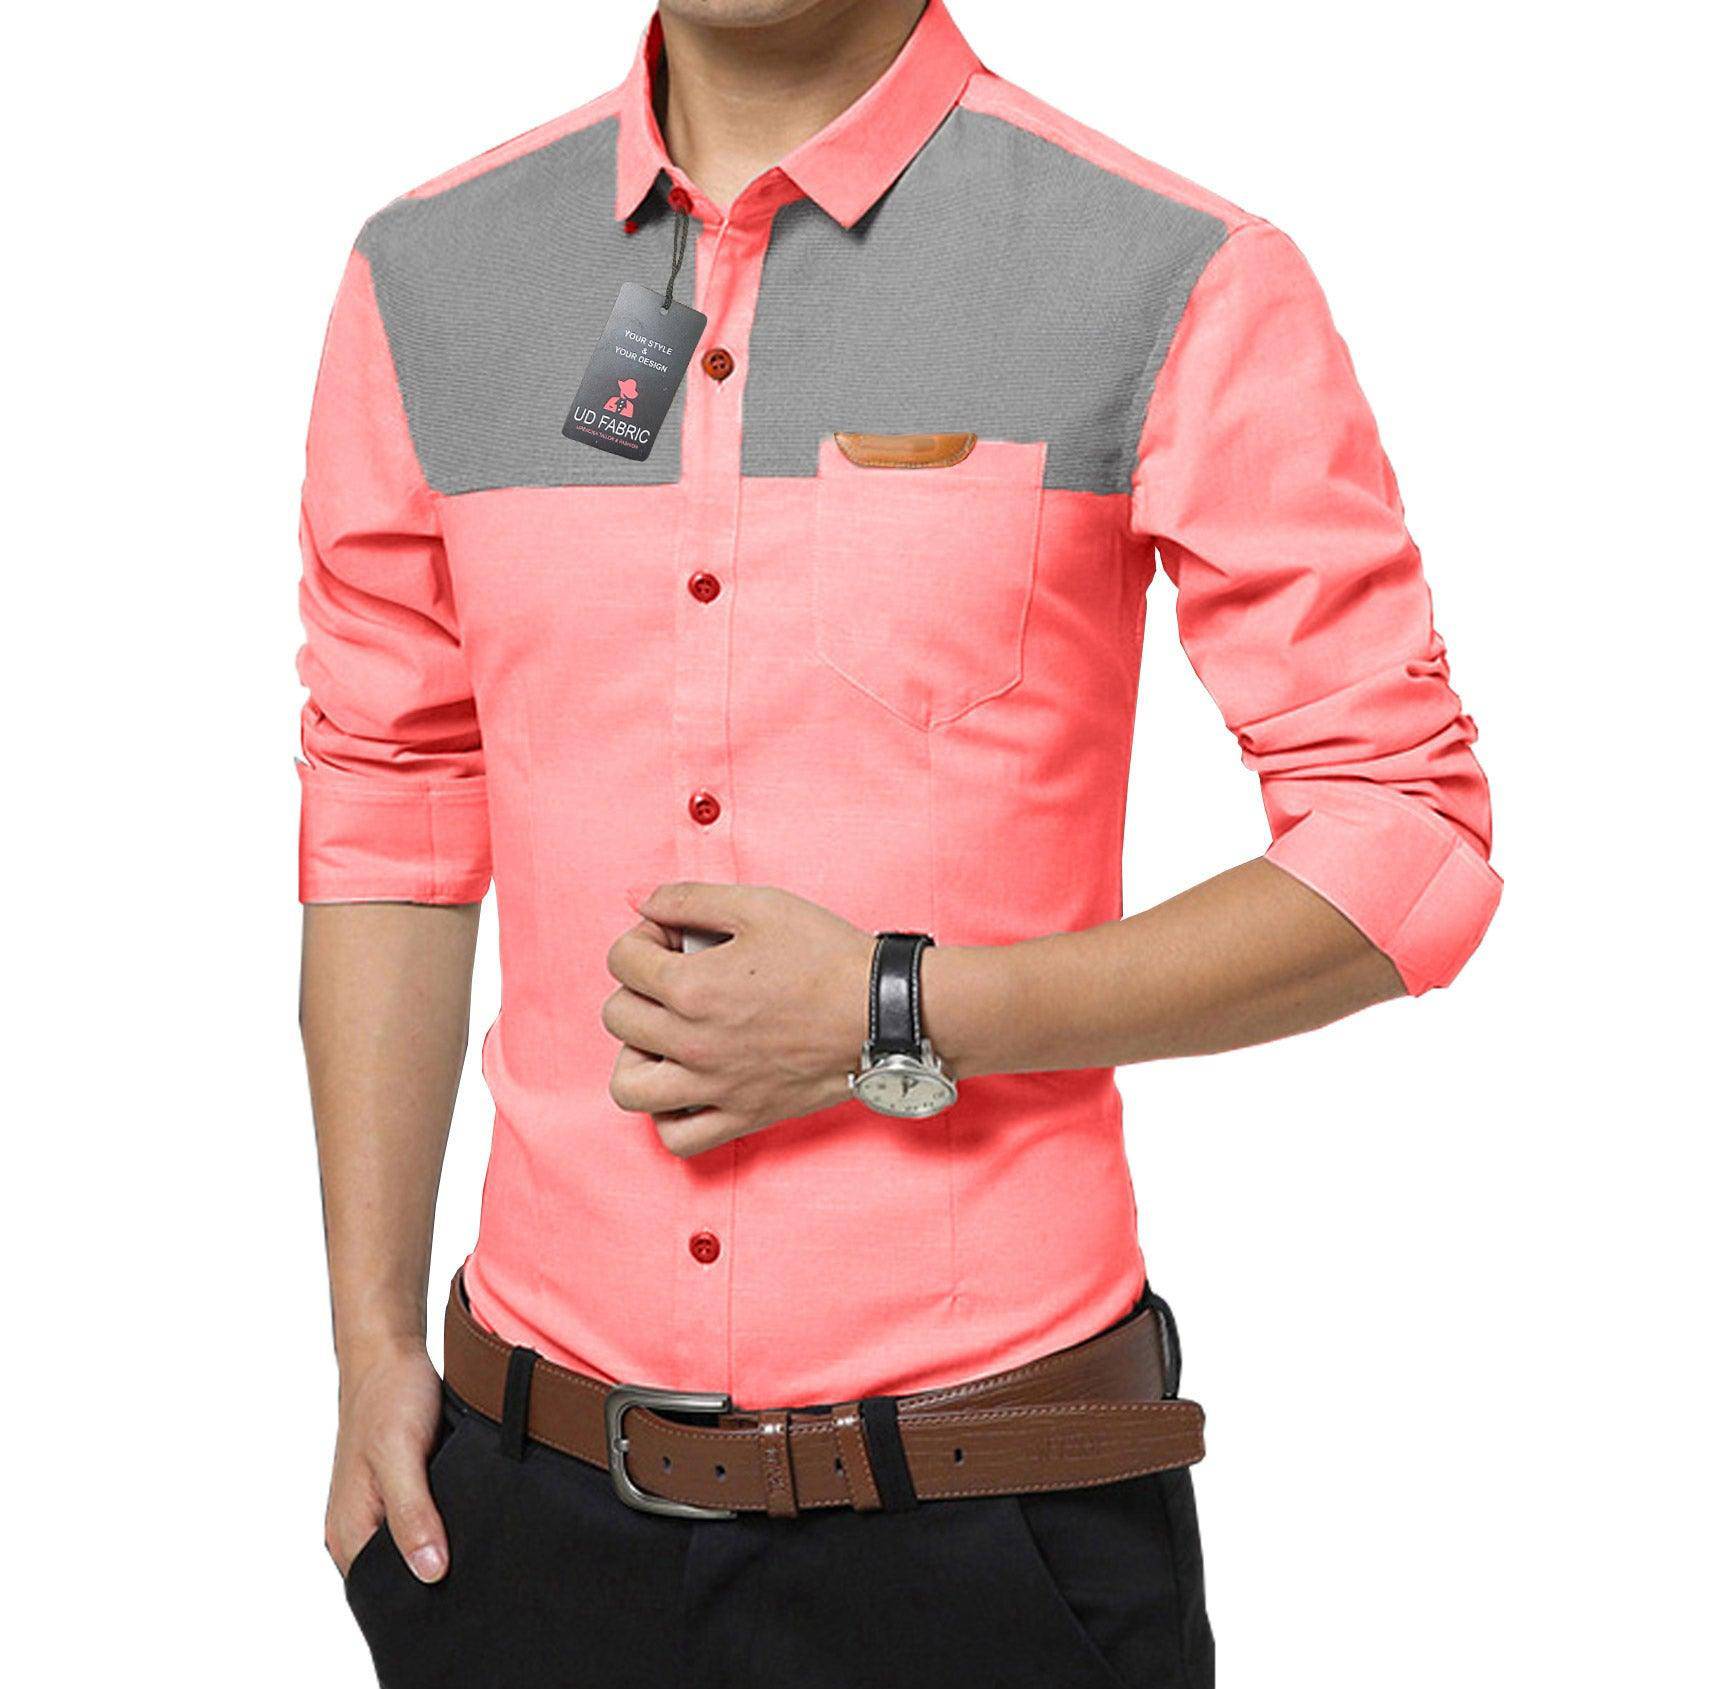 UD FABRIC Casual Slim Cotton Shirt for Men - Grey - UD FABRIC - Your Style our Design